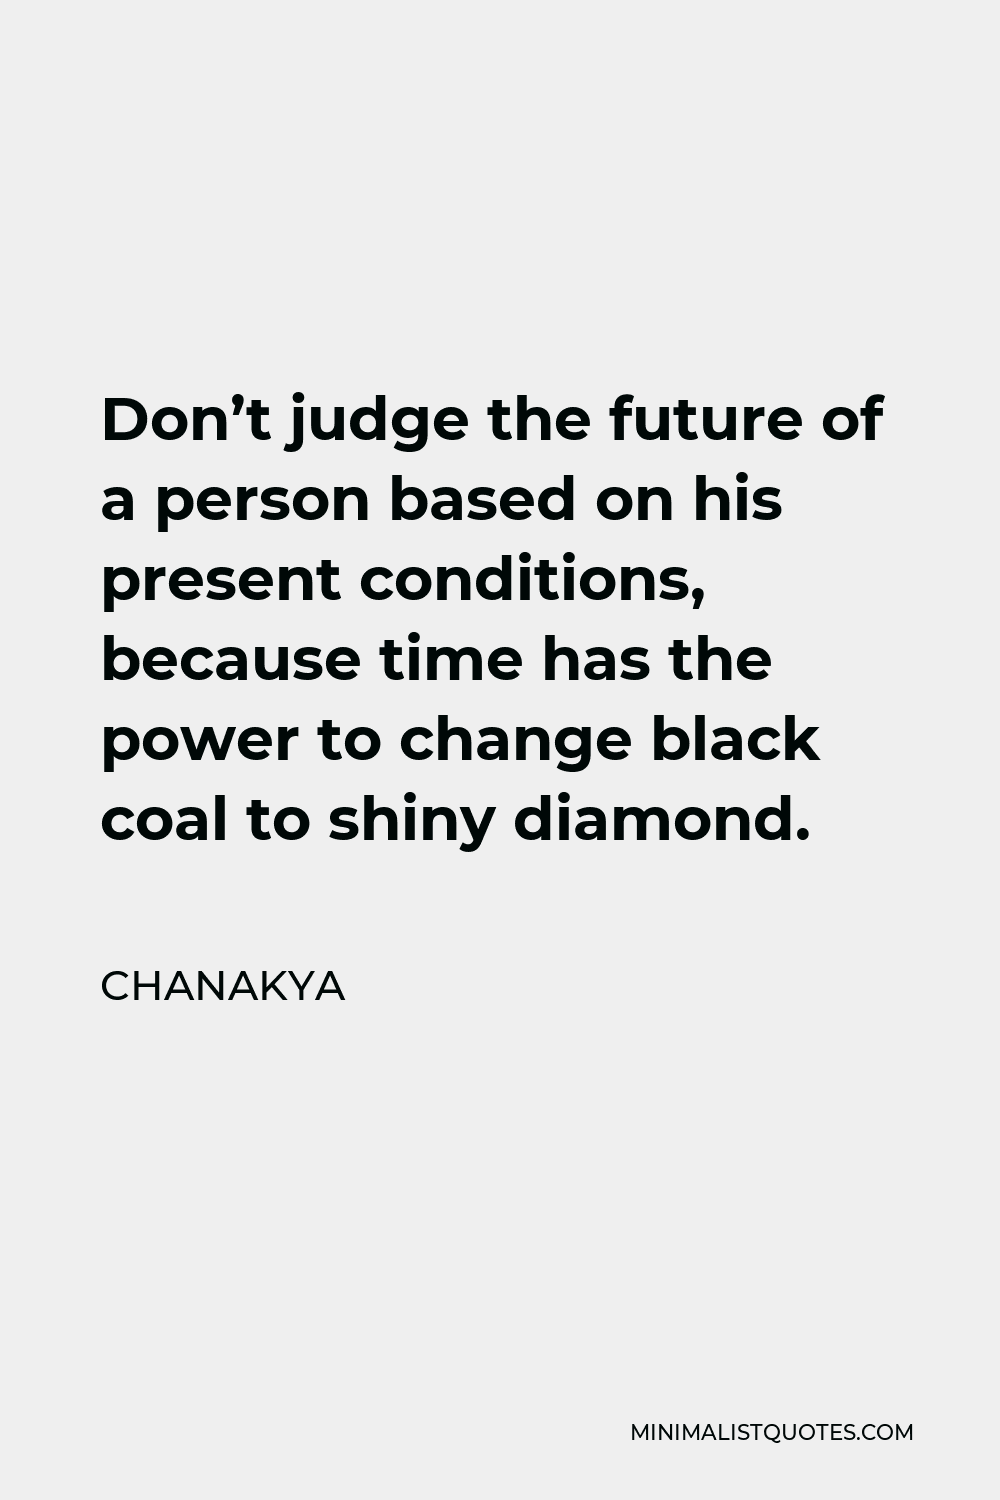 Chanakya Quote - Don’t judge the future of a person based on his present conditions, because time has the power to change black coal to shiny diamond.